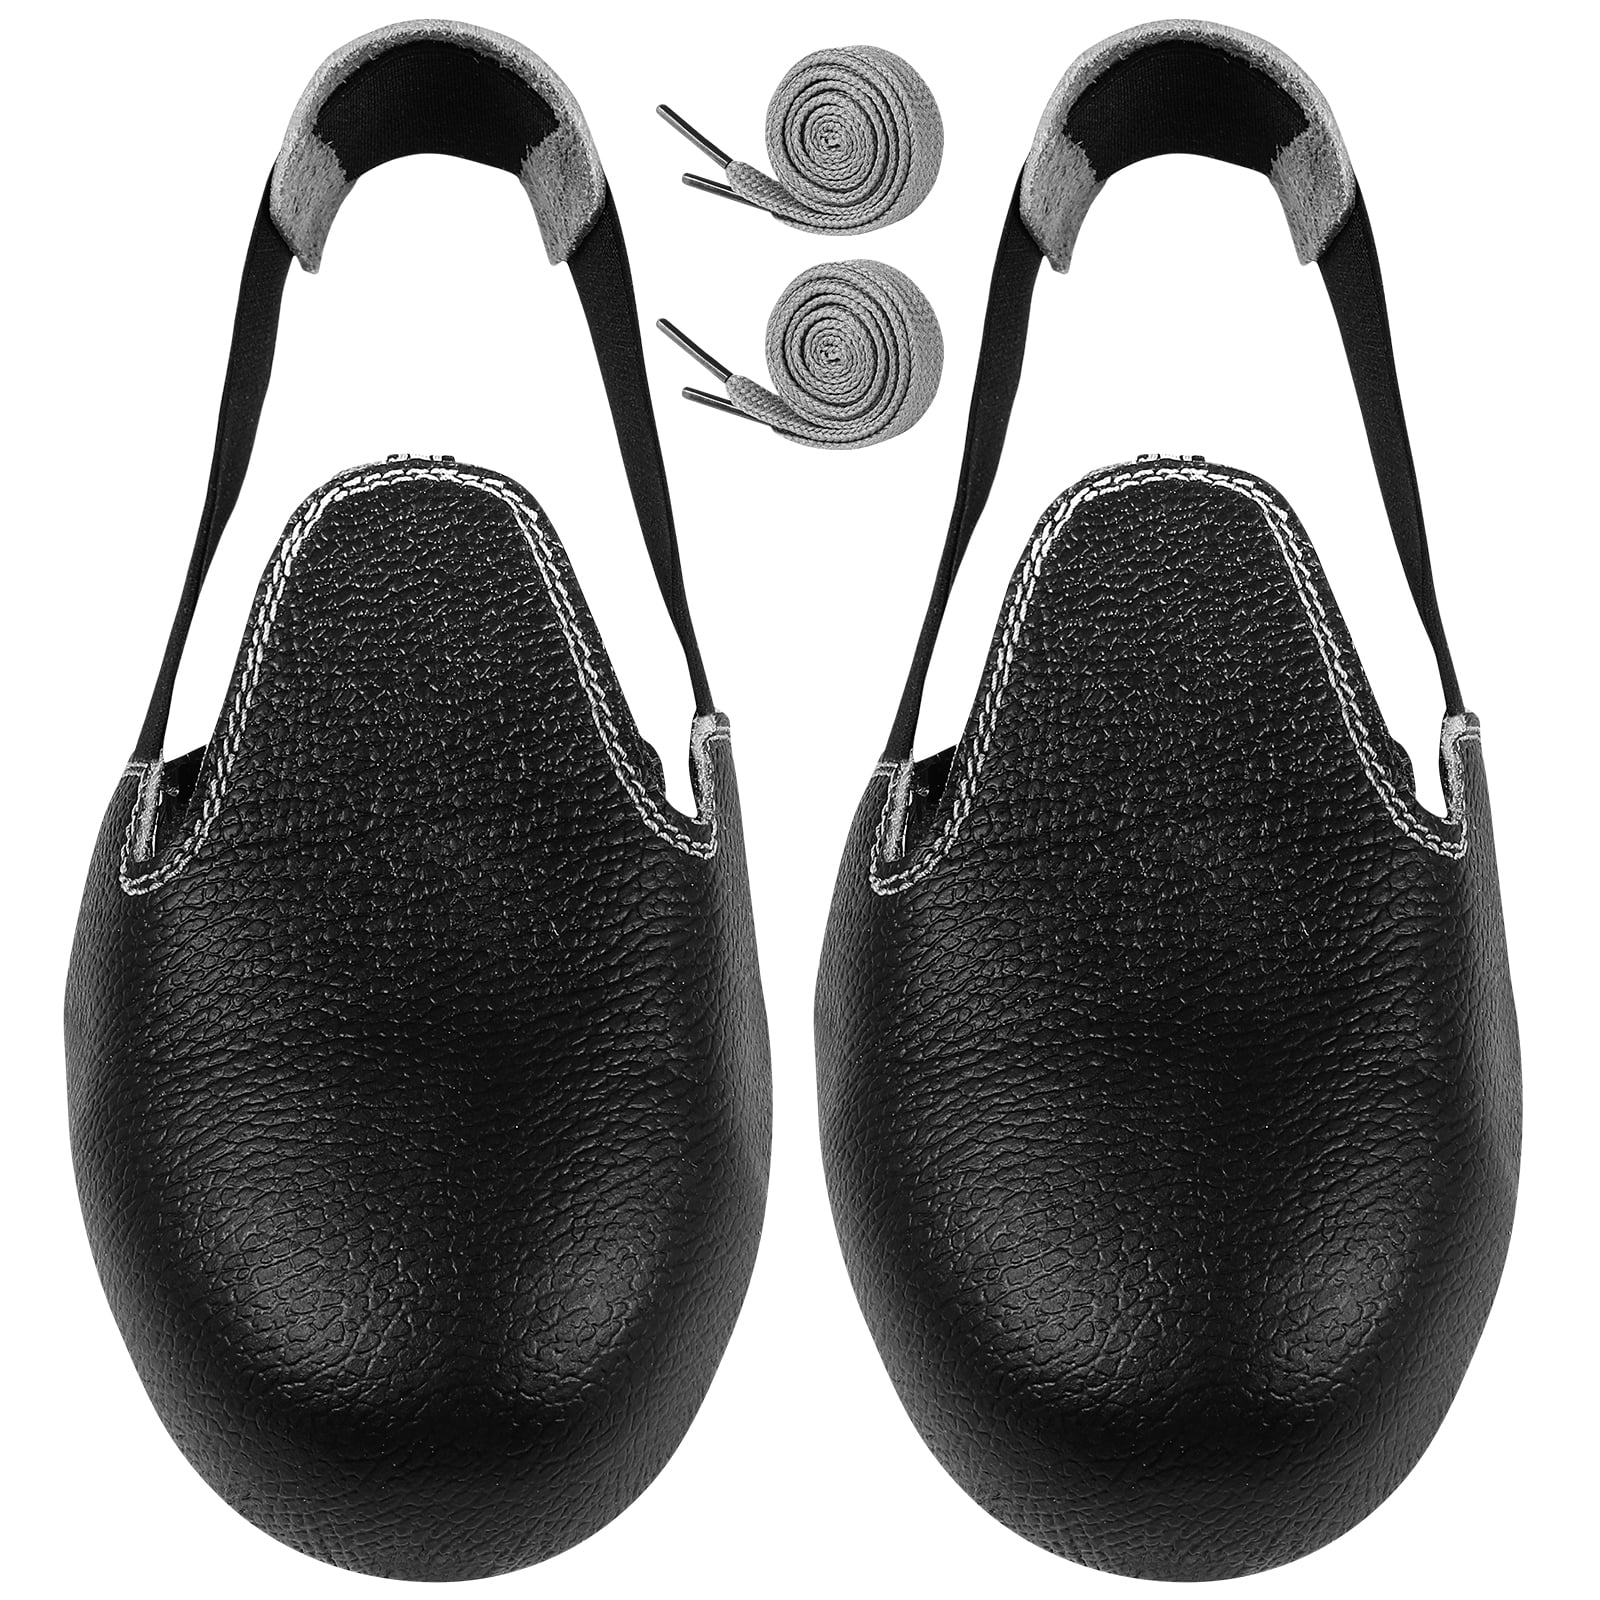 Toe Covers Shoe Steel Safety Overshoes Cover Cap Shoes Leather Anti ...